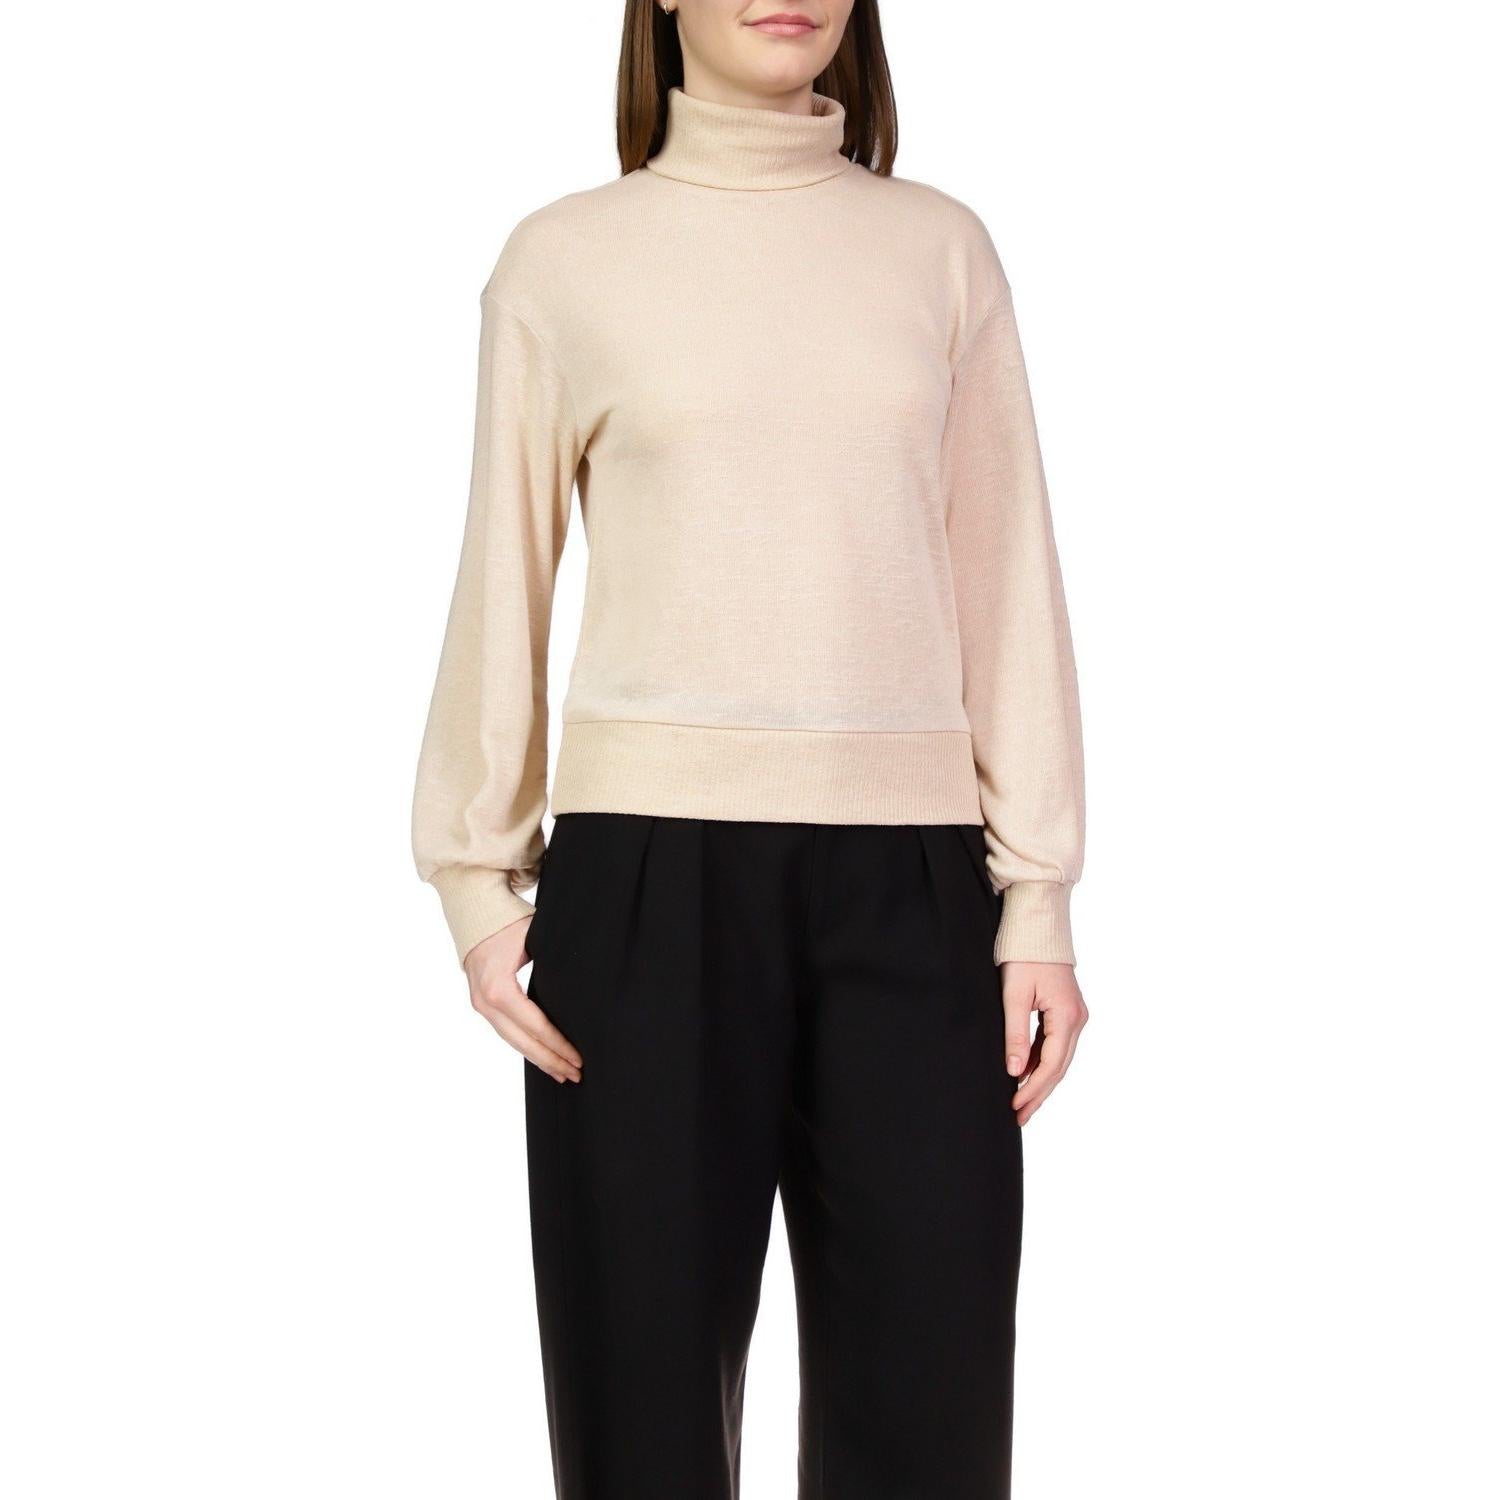 Sanctuary - Ruched Sleeve Turtleneck Top in Toasted Marshmallow-SQ4222033